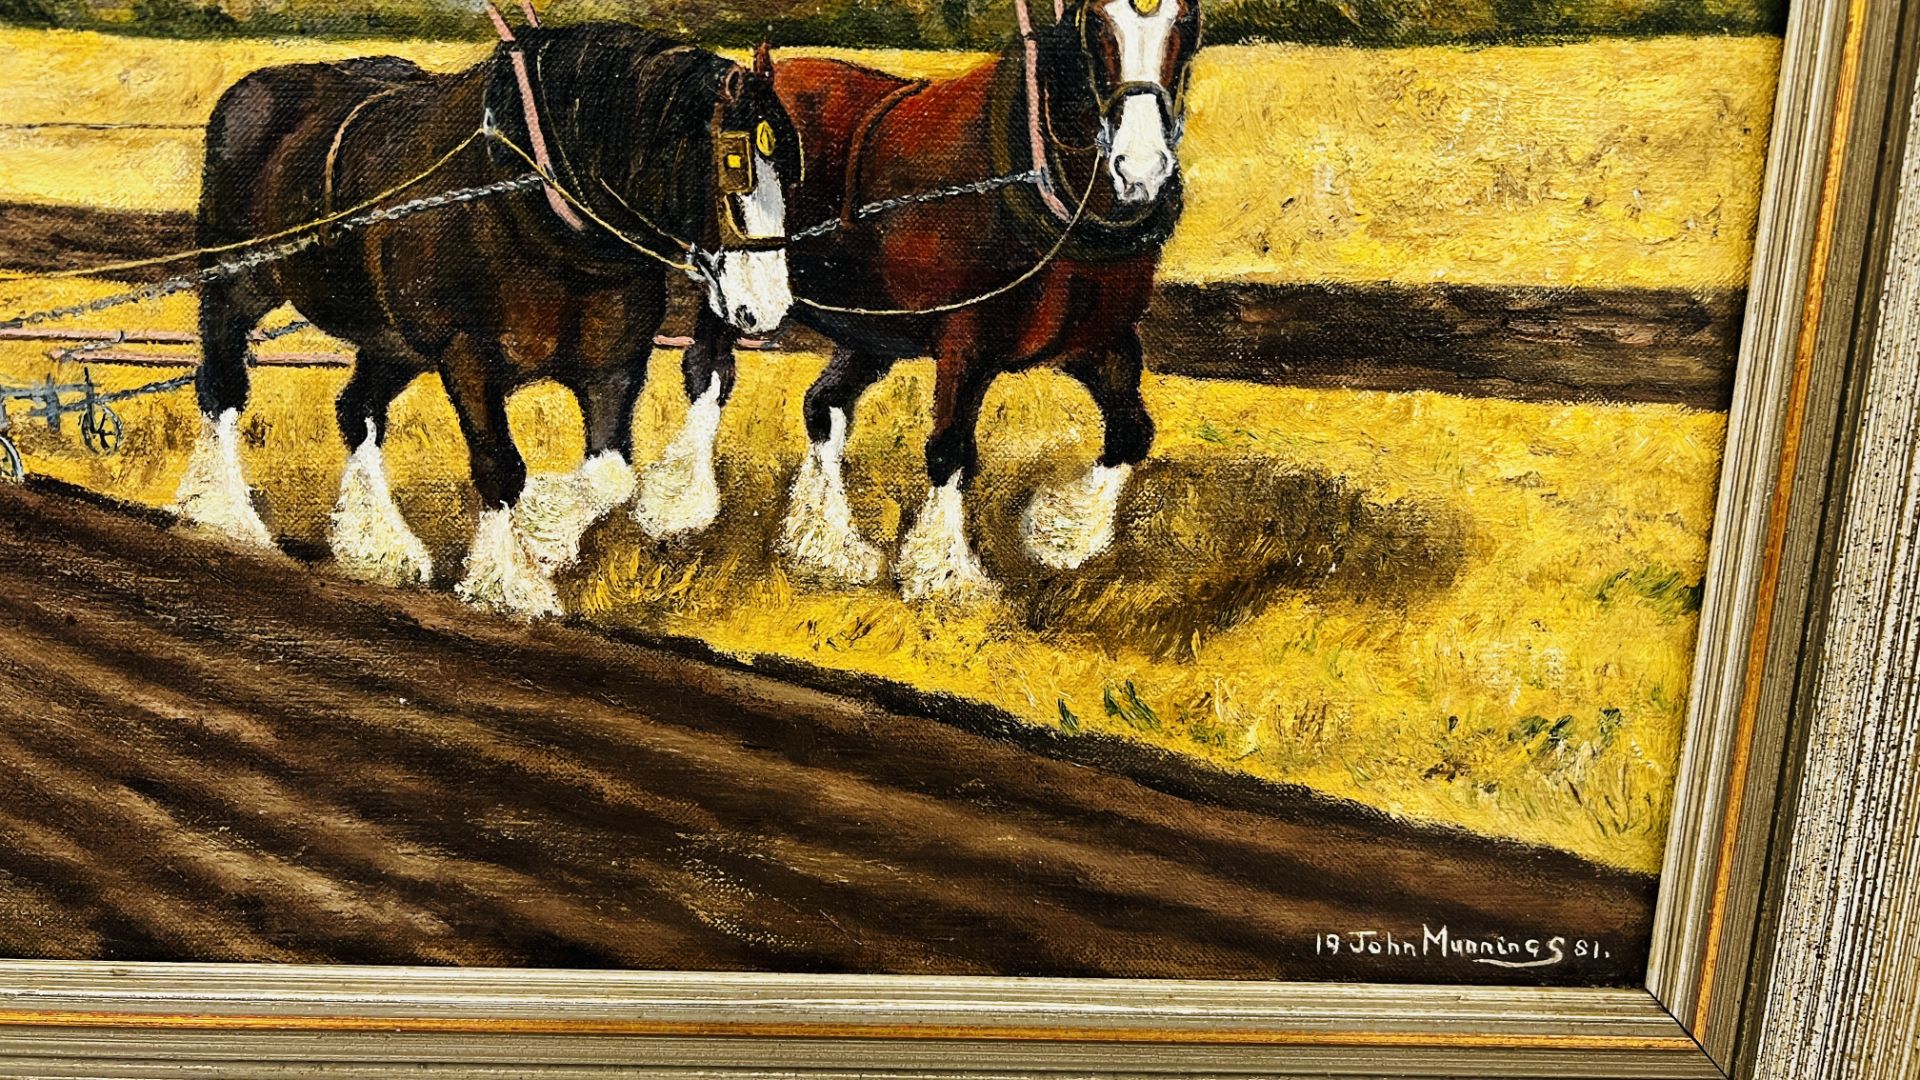 OIL ON CANVAS "AUTUMN PLOUGHING BECCLES ROAD HOTTON" BEARING SIGNATURE JOHN MUNNINGS - 60CM X 40CM. - Image 7 of 9